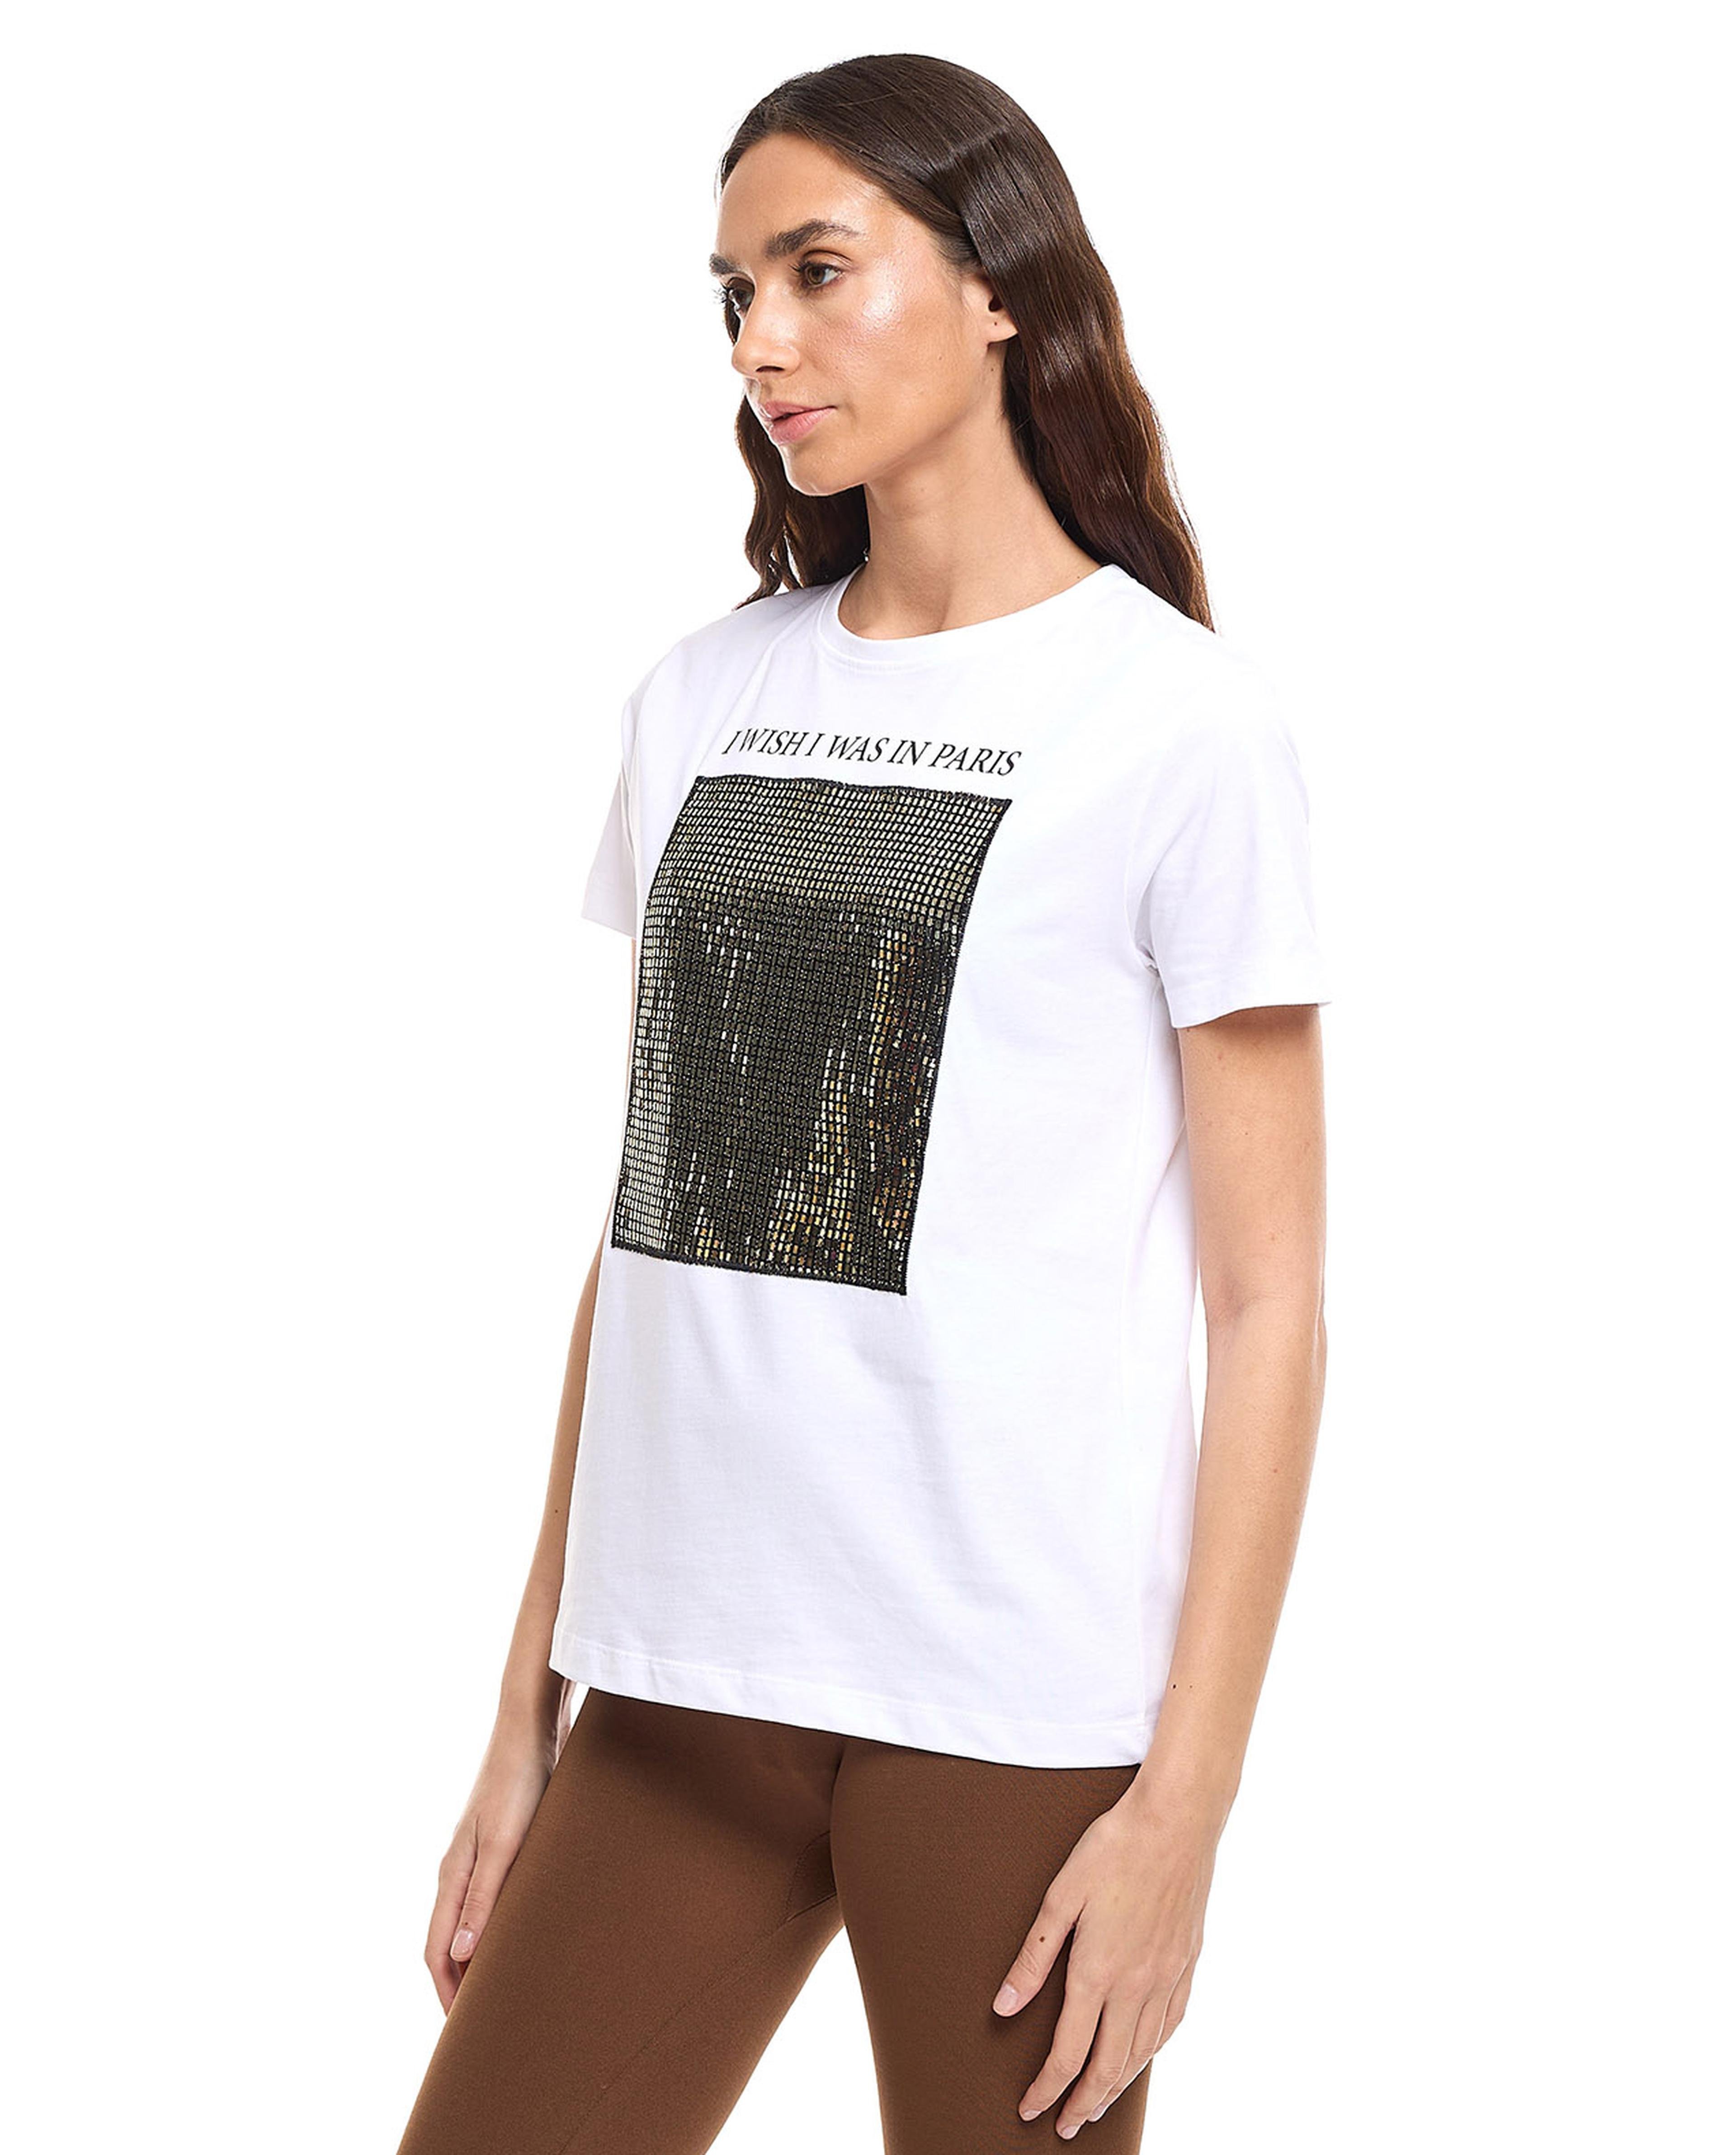 Embellished T-Shirt with Crew Neck and Short Sleeves